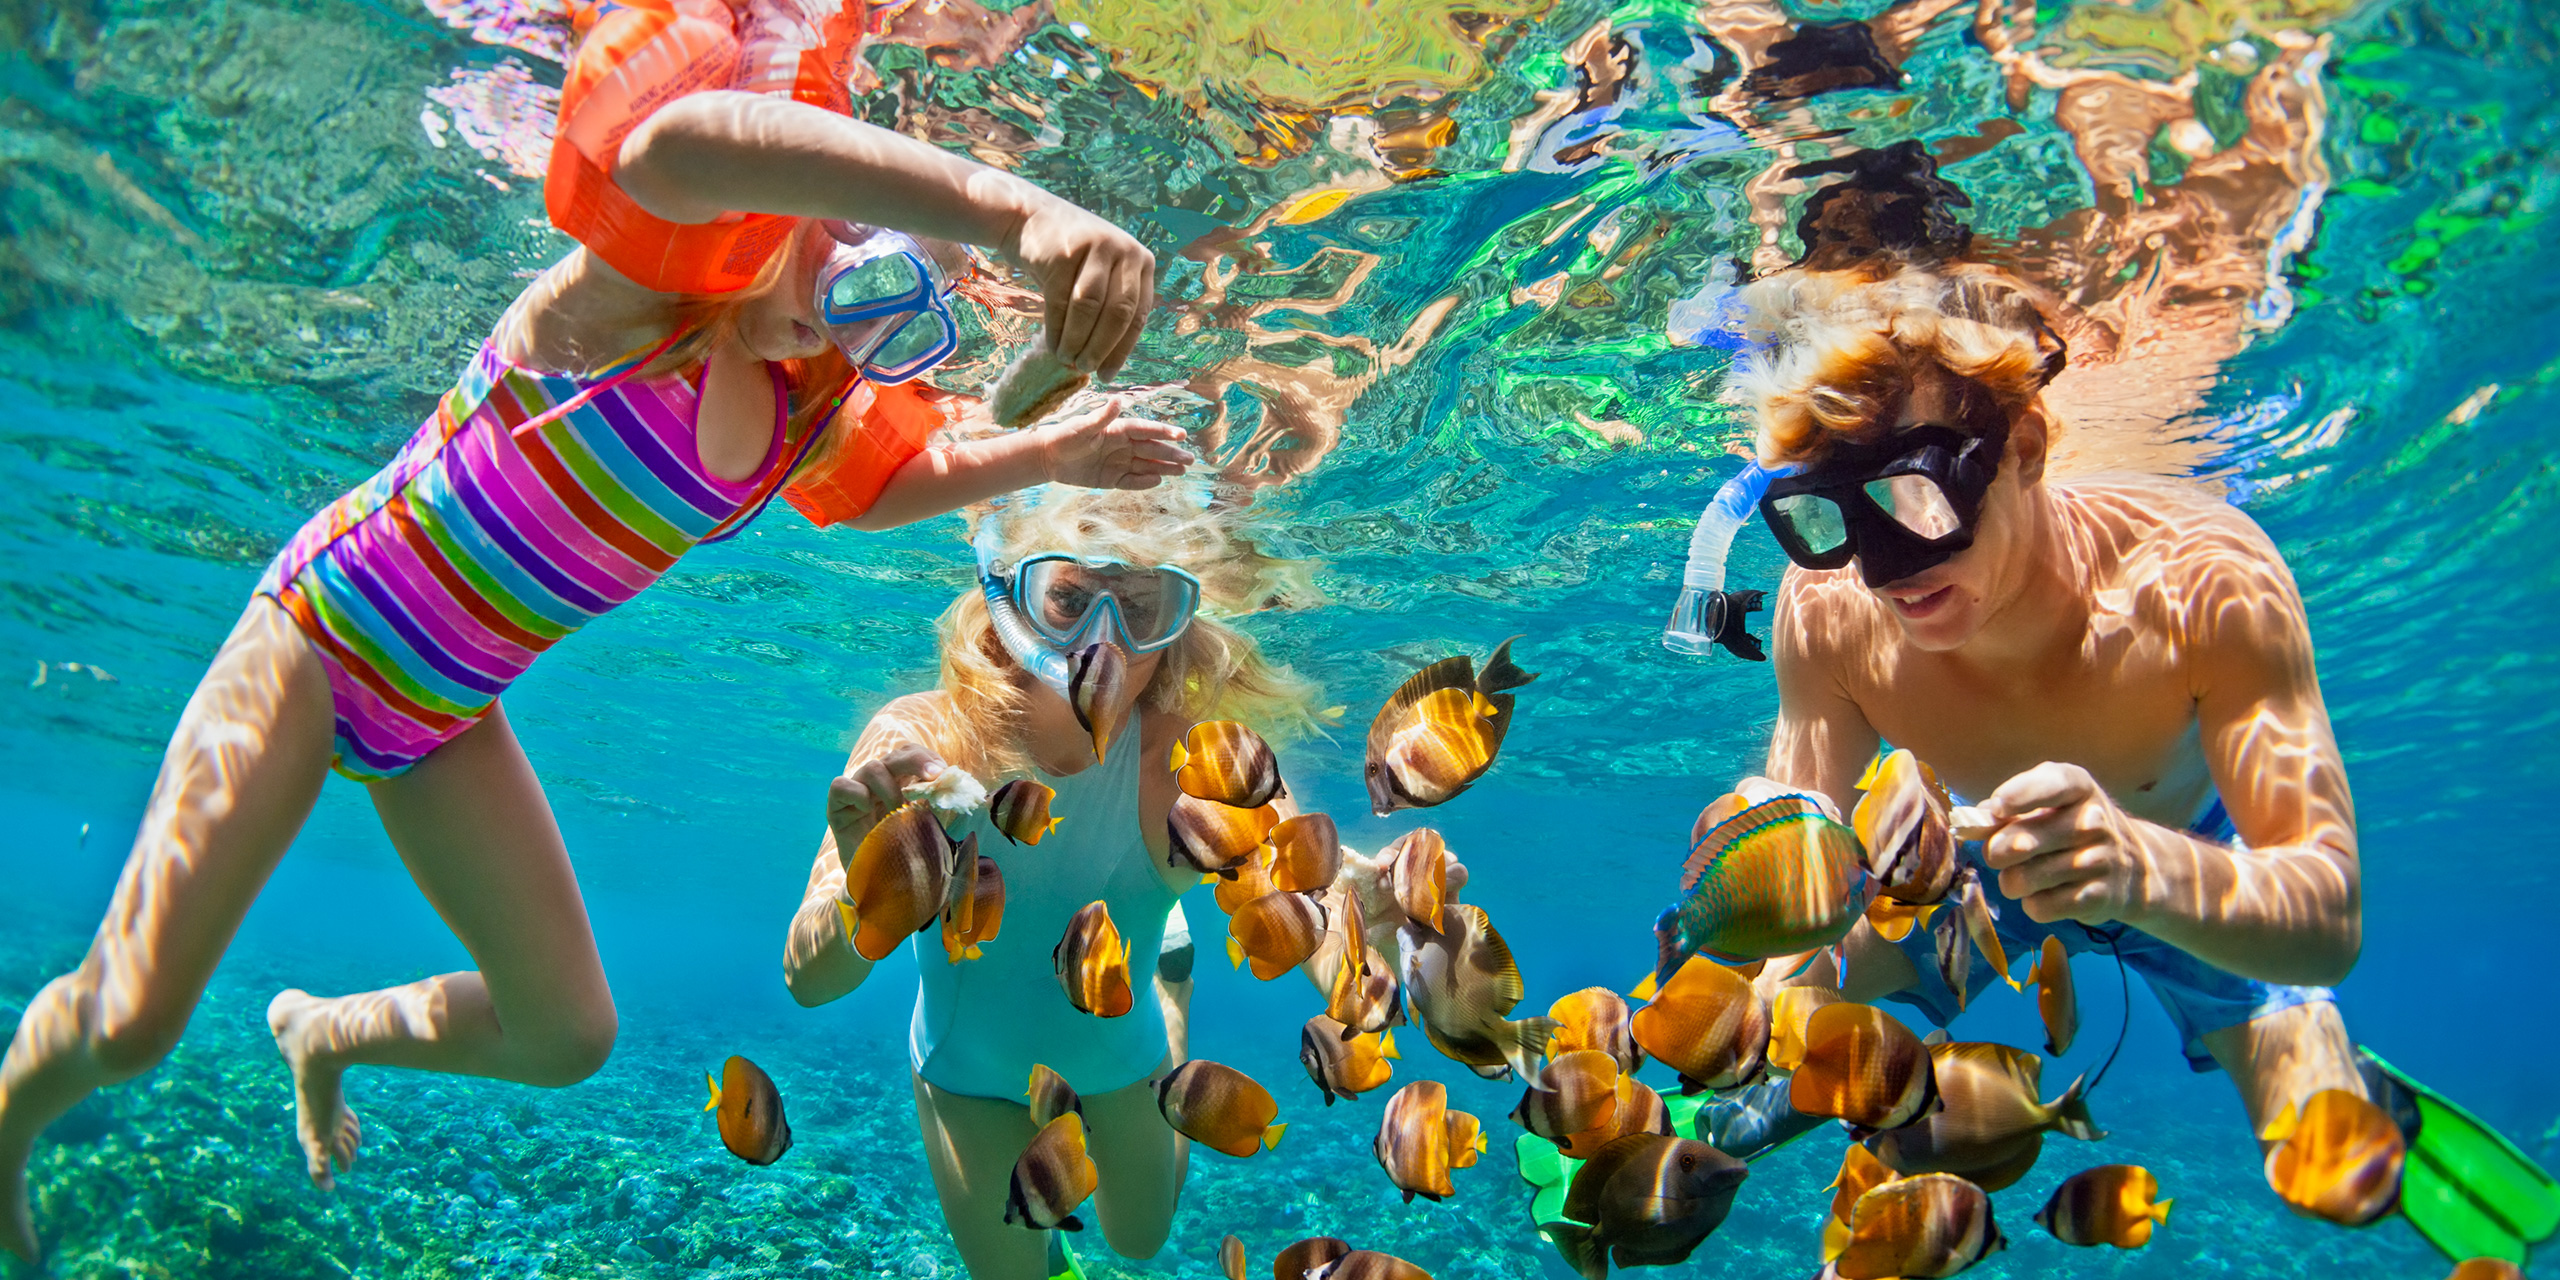 father, mother, child in snorkeling mask dive underwater with tropical fishes in coral reef sea pool; Courtesy of Tropical studio/Shutterstock